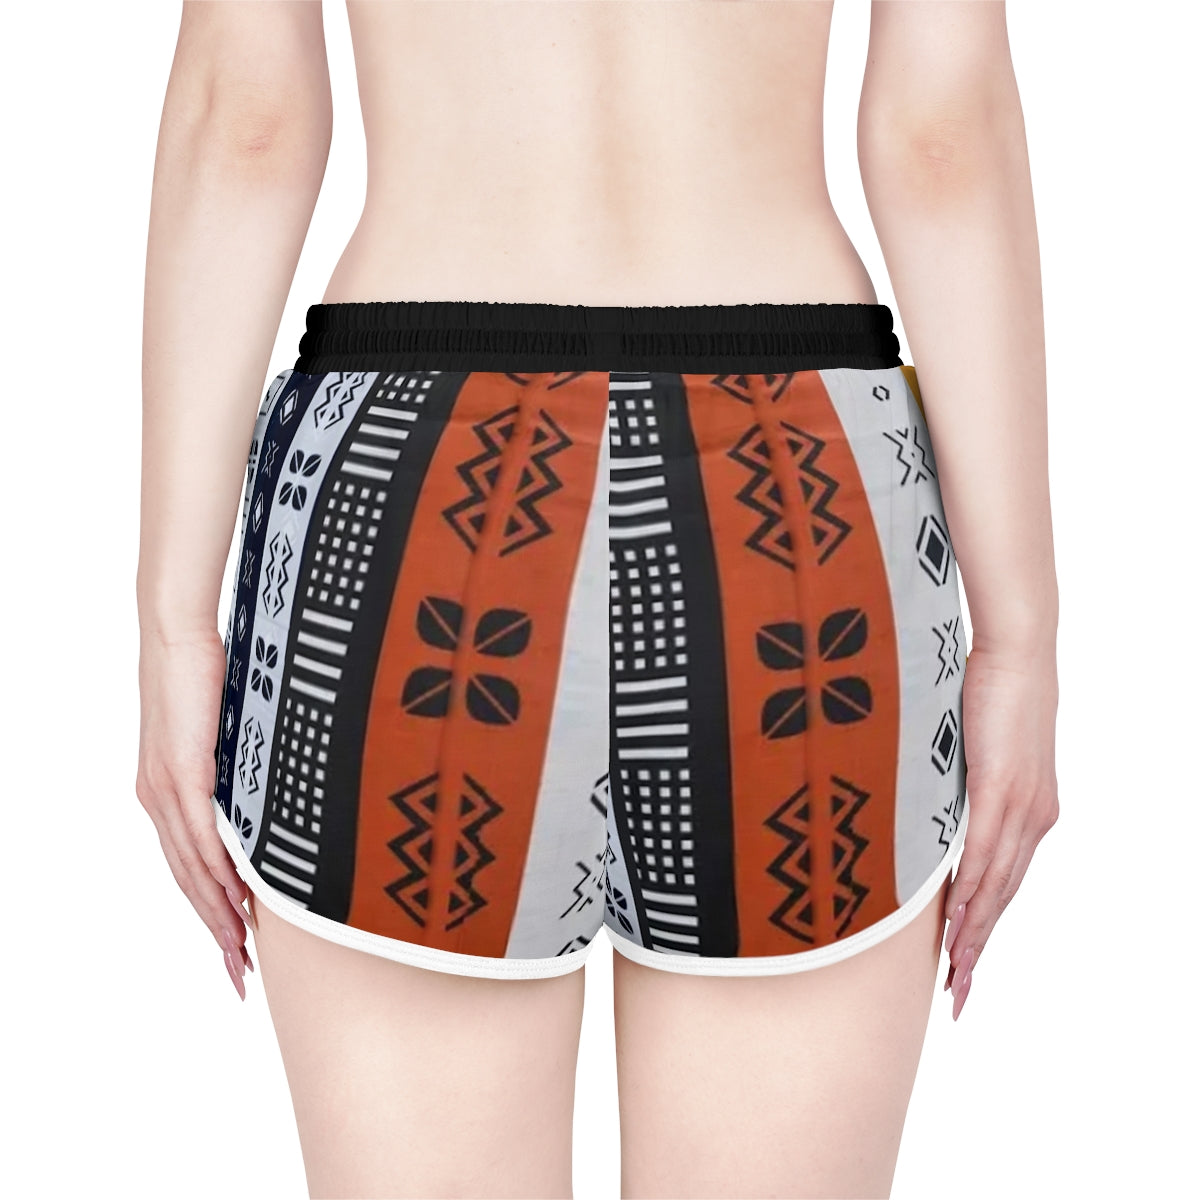 Mudcloth Print Maroon White Shorts for Women